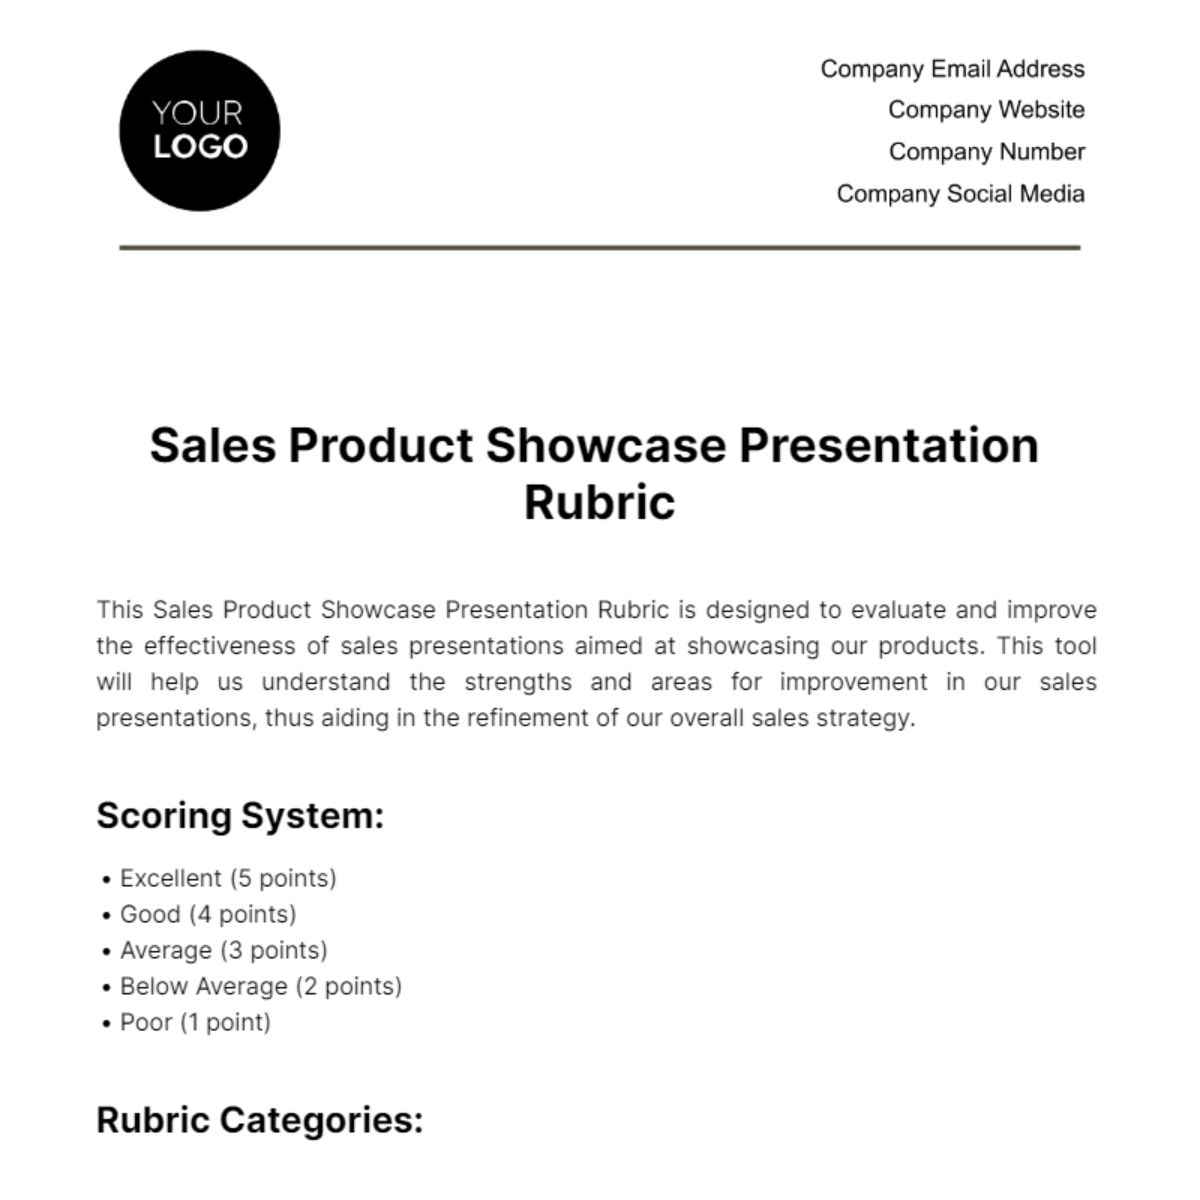 Free Sales Product Showcase Presentation Rubric Template